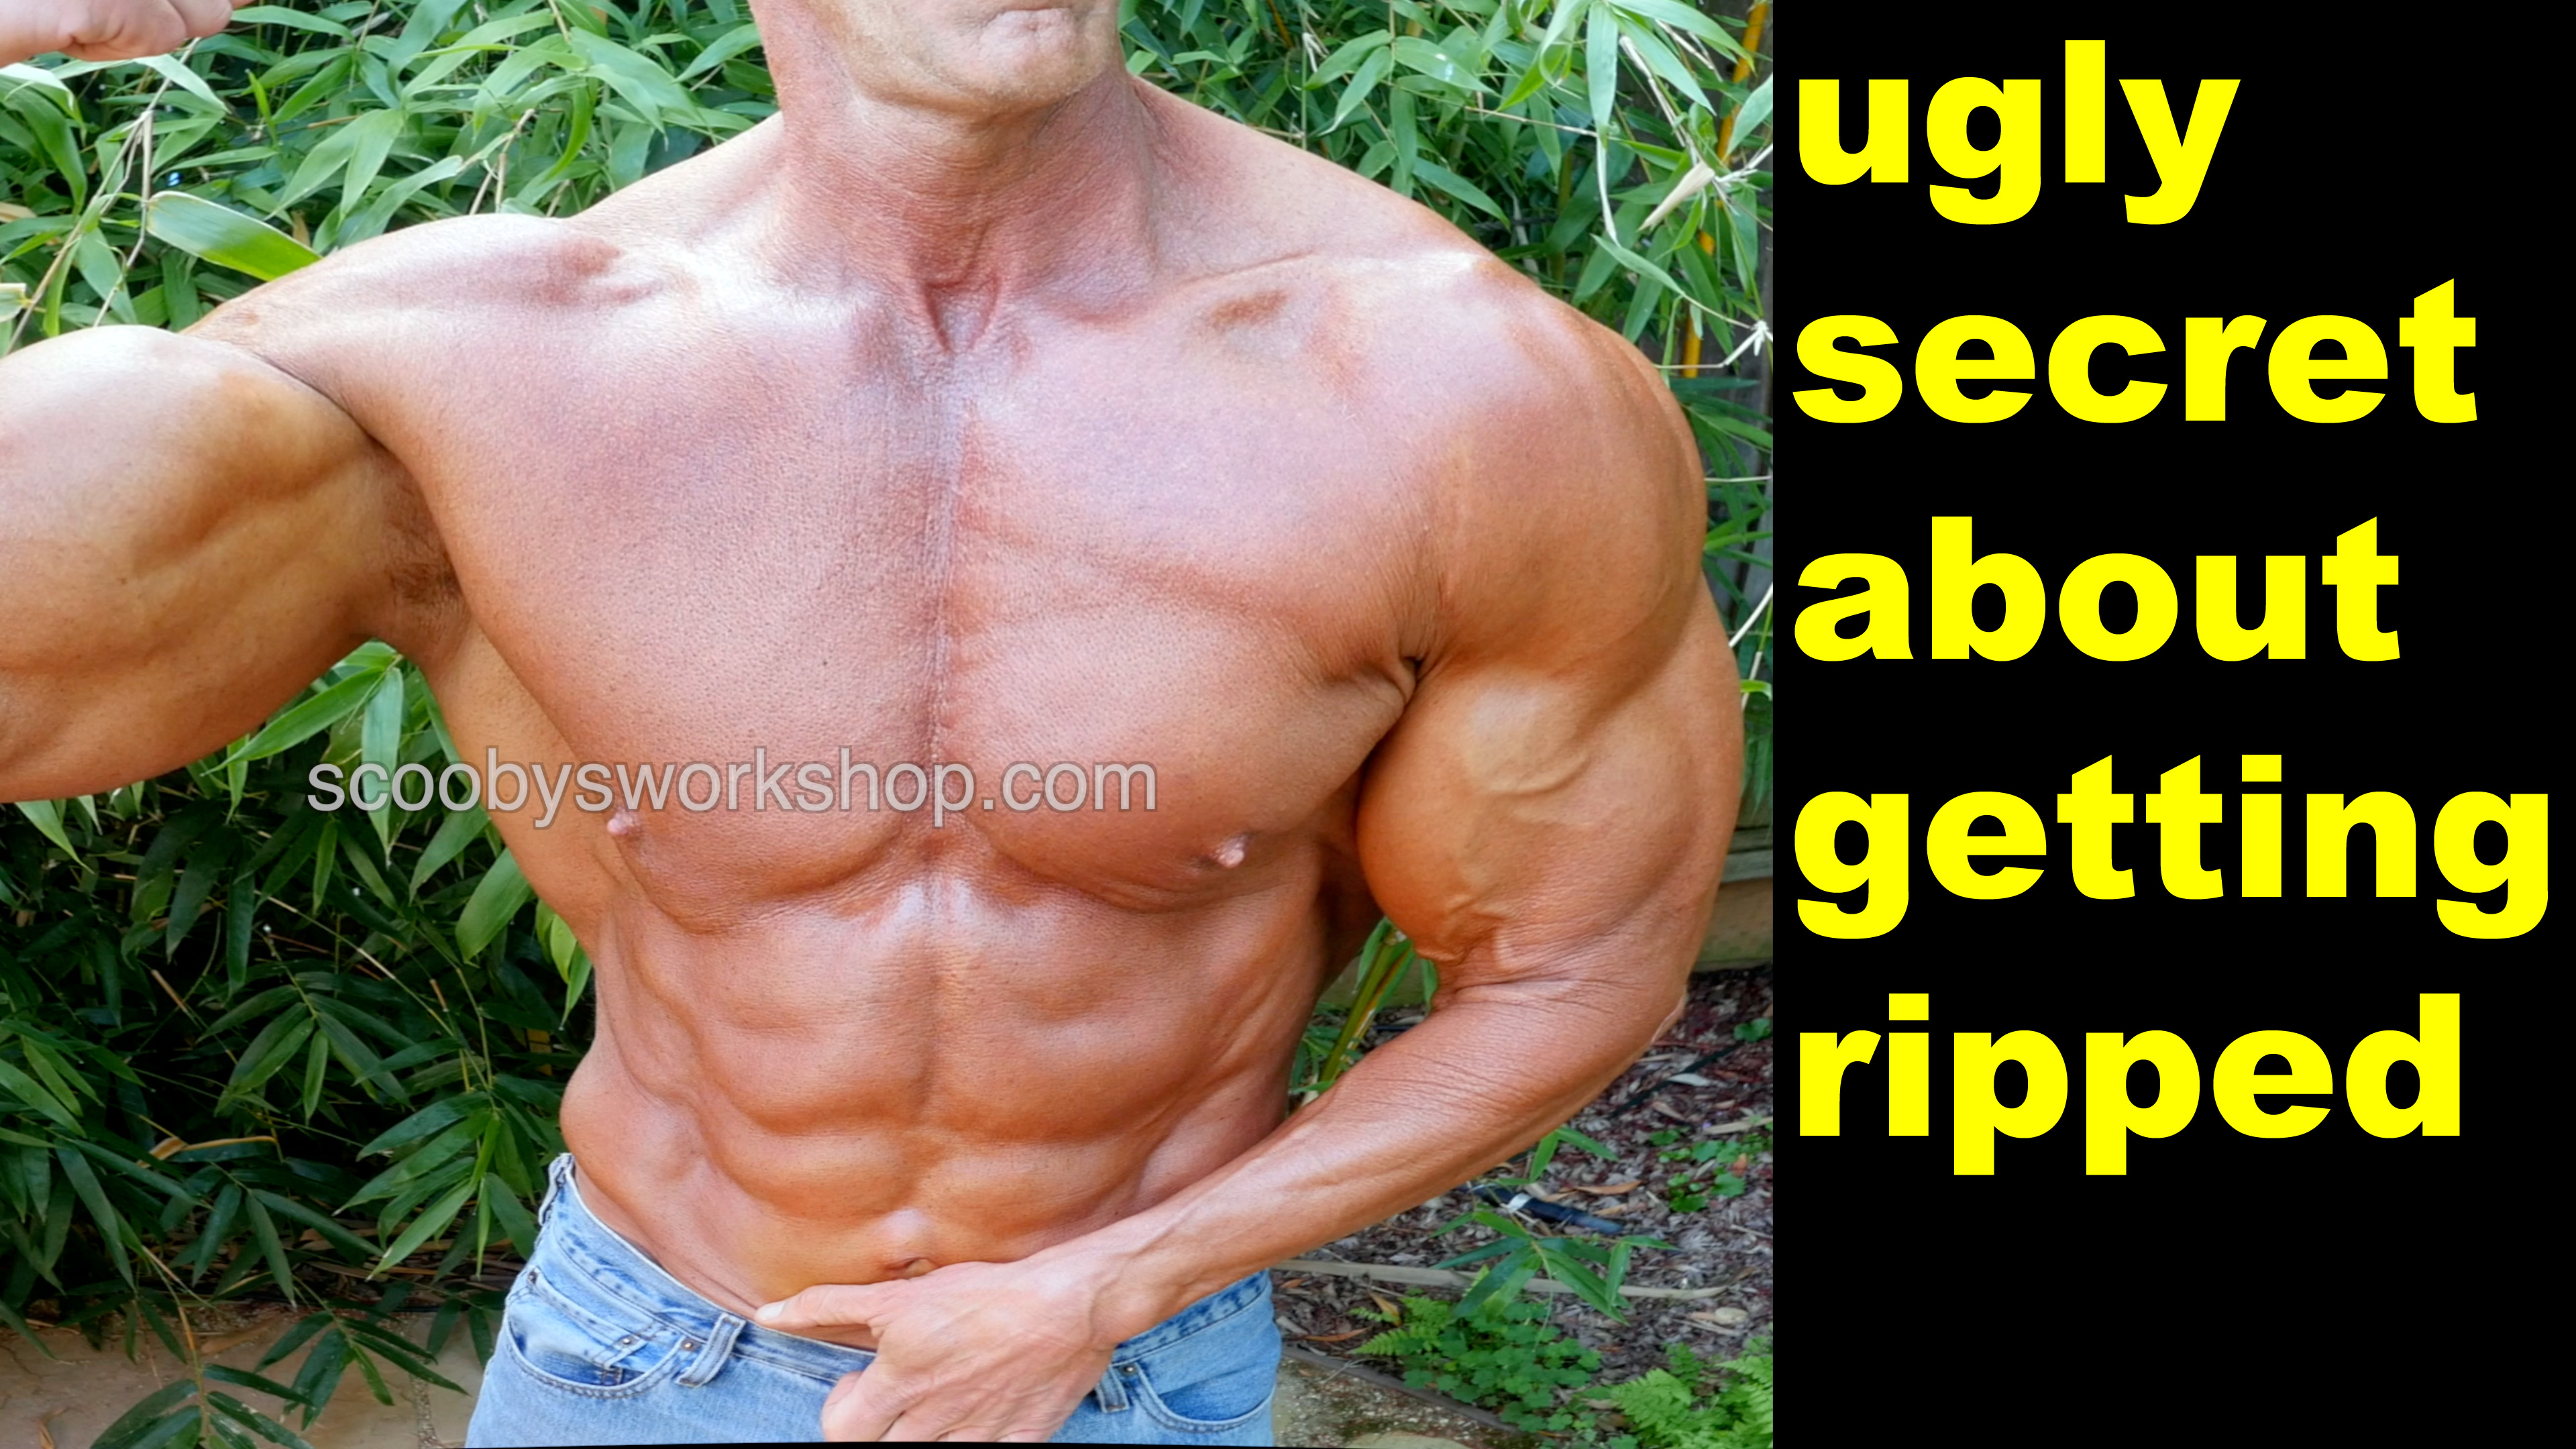 ugly secret about getting ripped